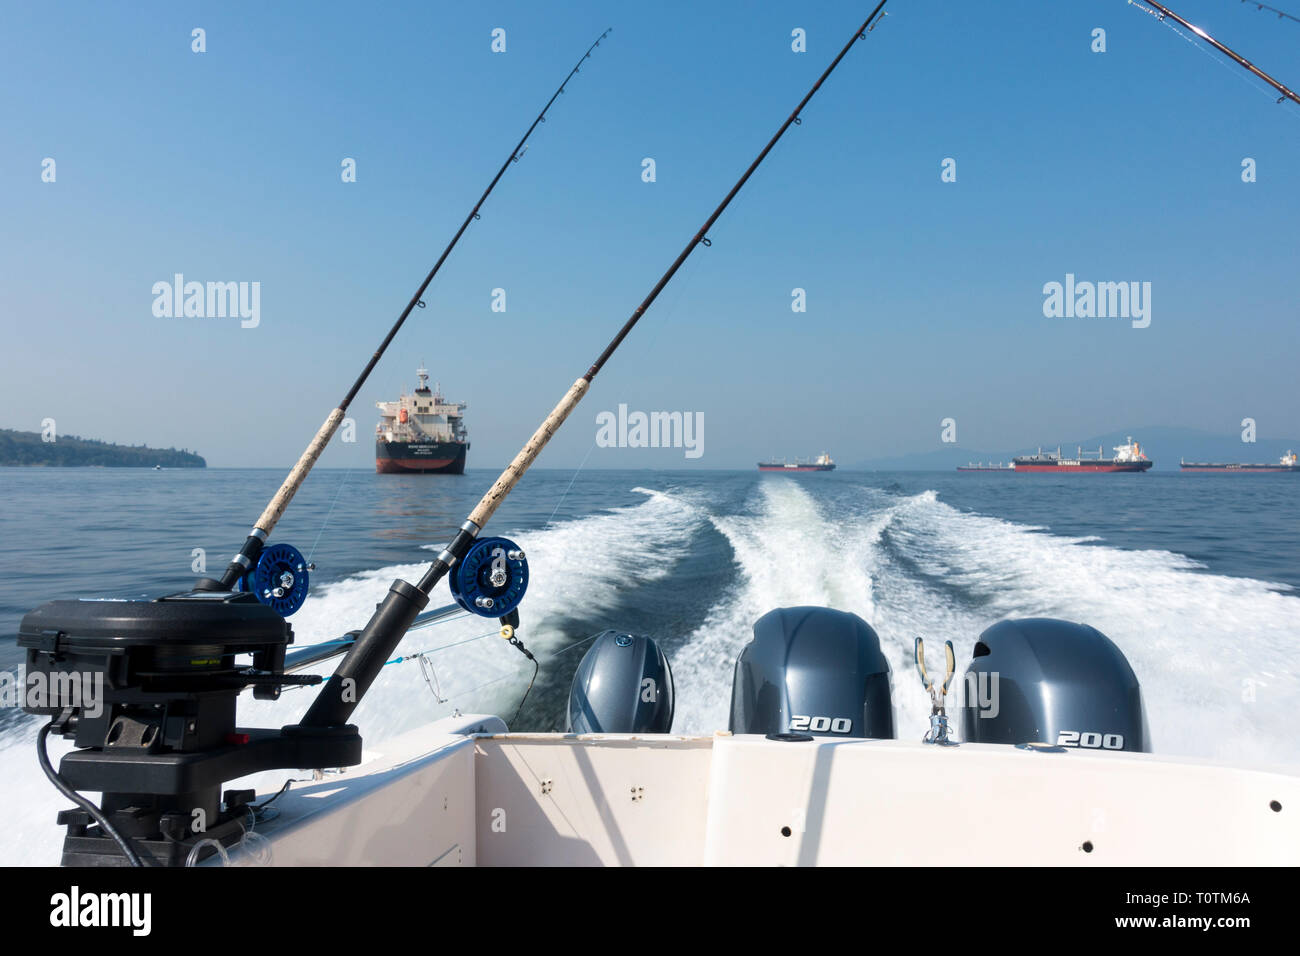 A rear view of a Vancouver based tourist chartered salmon fishing boat Stock Photo